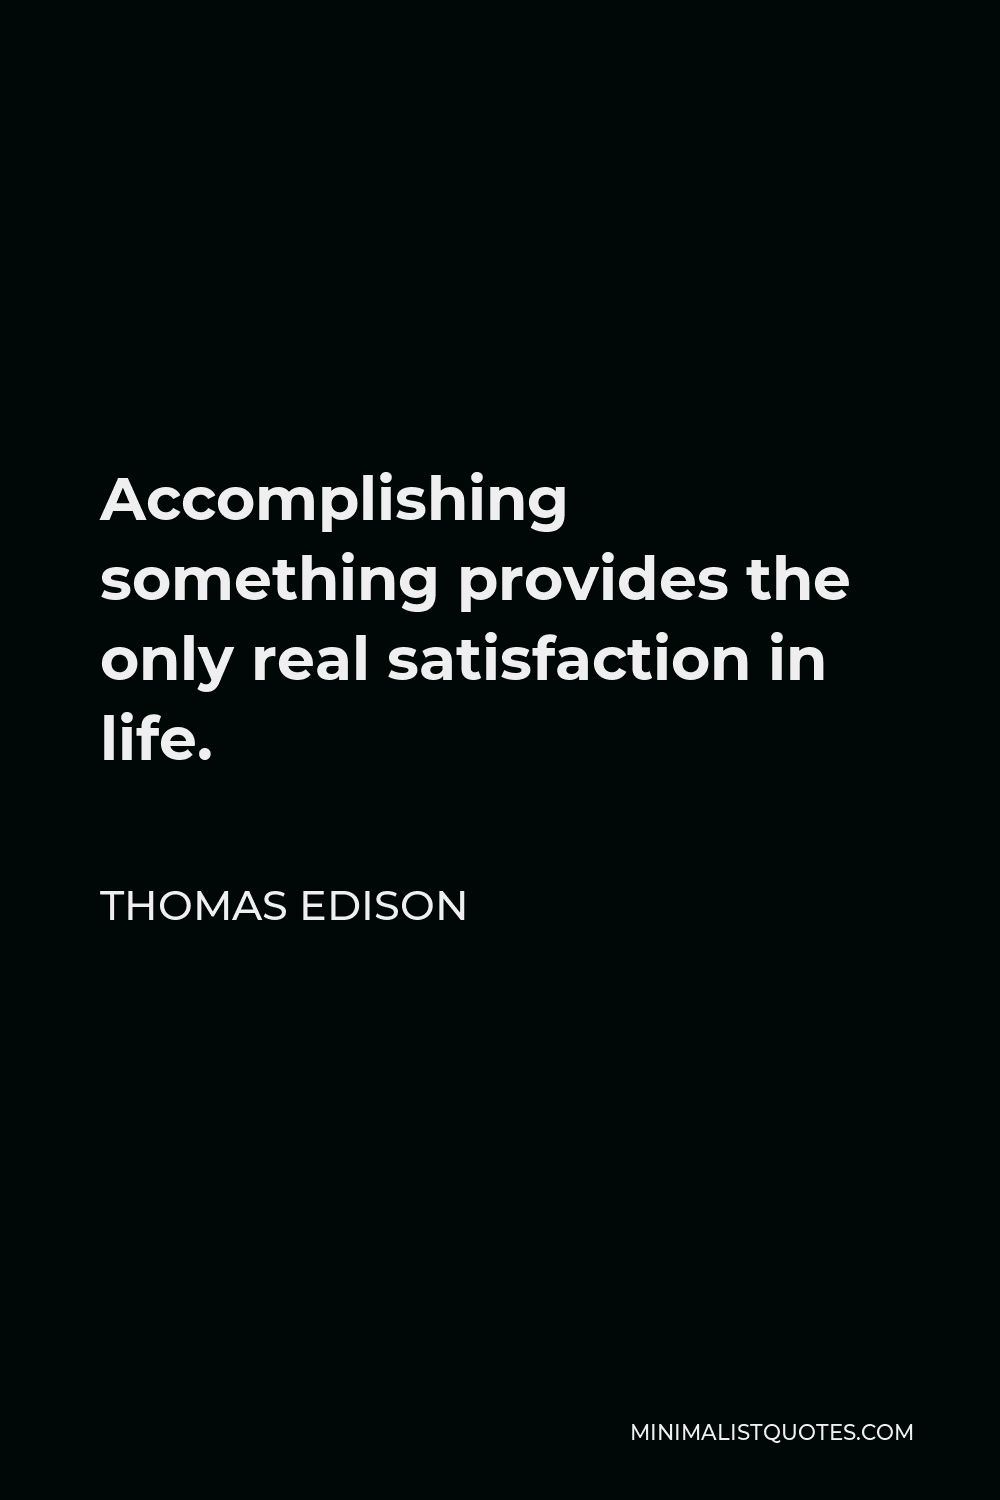 Thomas Edison Quote - Accomplishing something provides the only real satisfaction in life.